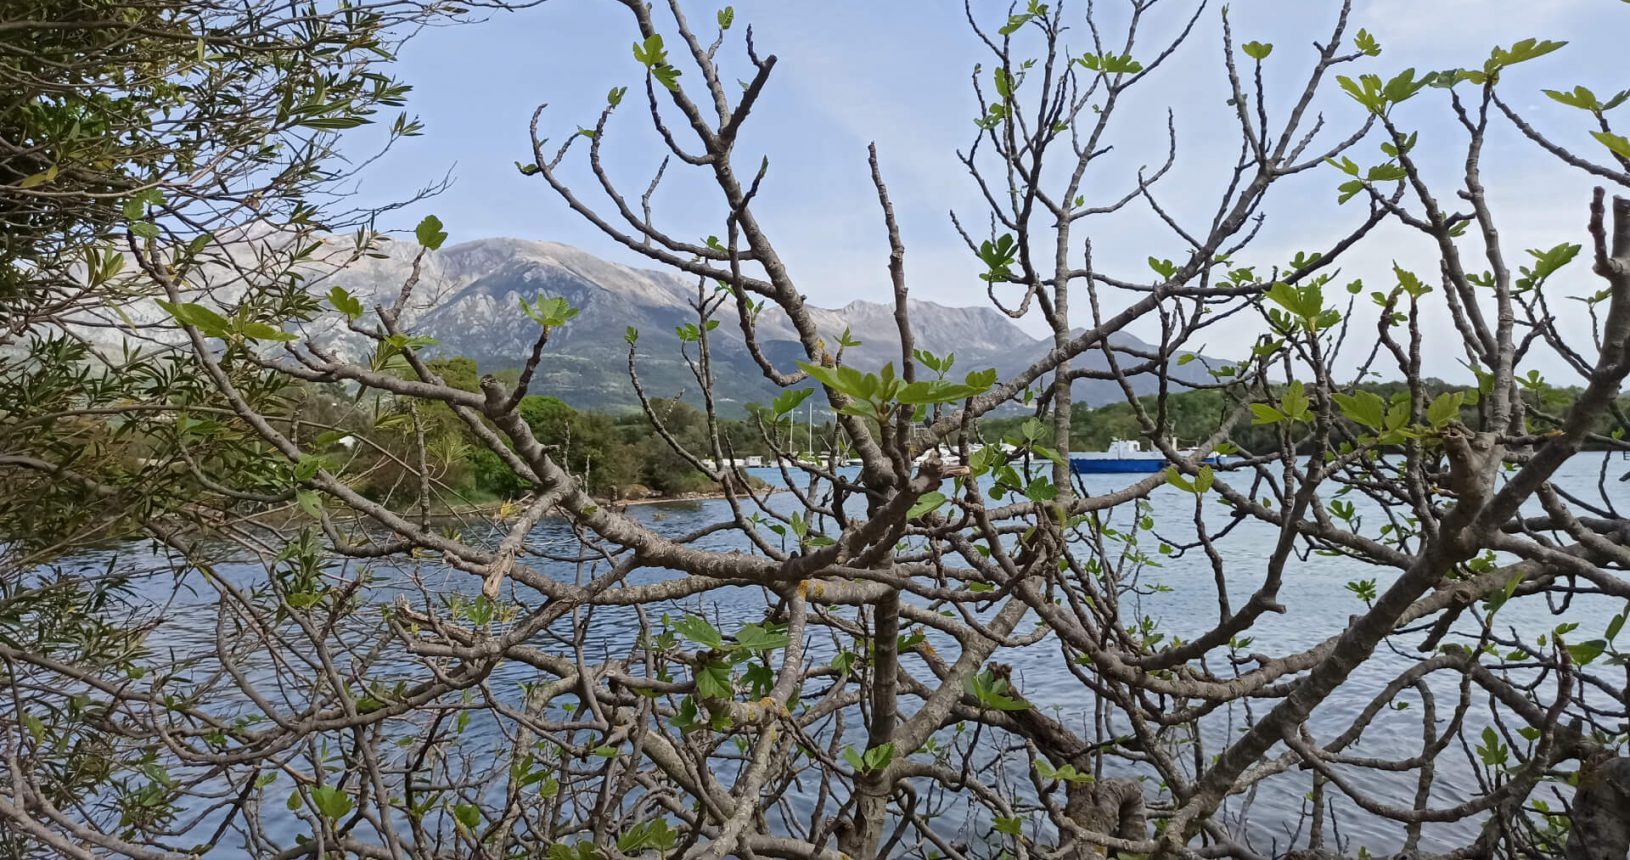 Ship and mountains behind the trees. The island of flowers